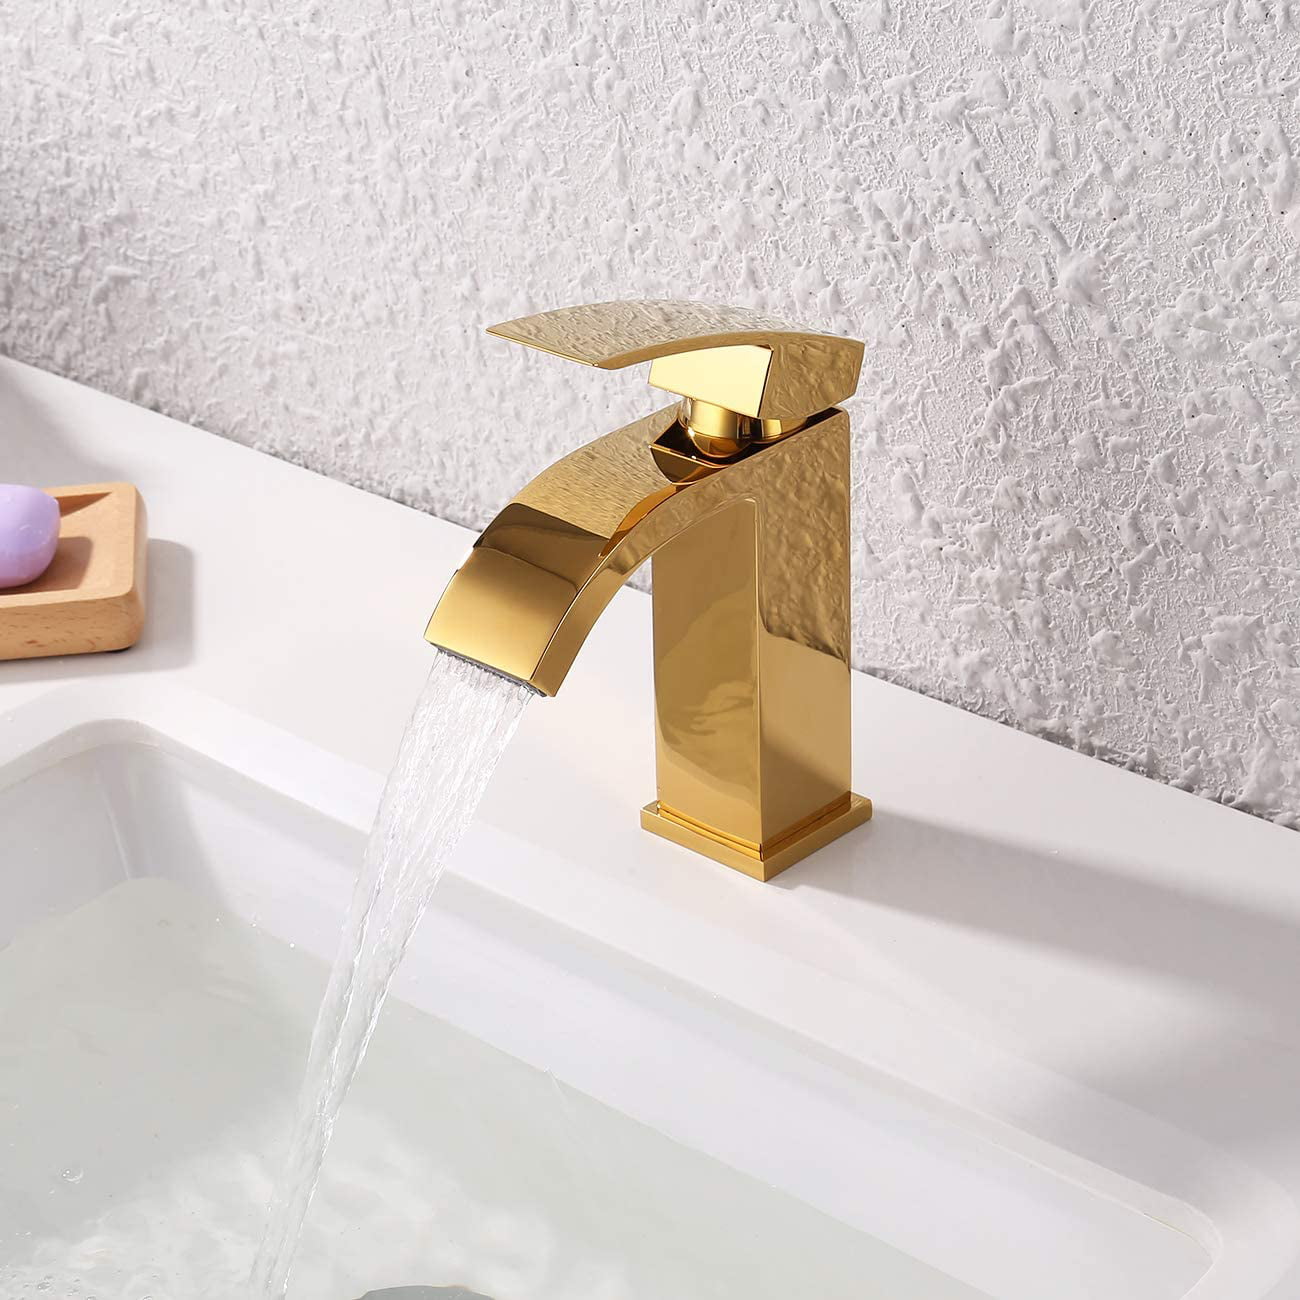 Tap/Mixer 35mm Cartridge Rose Gold for Basin Sink Wall Kitchen Bathroom 